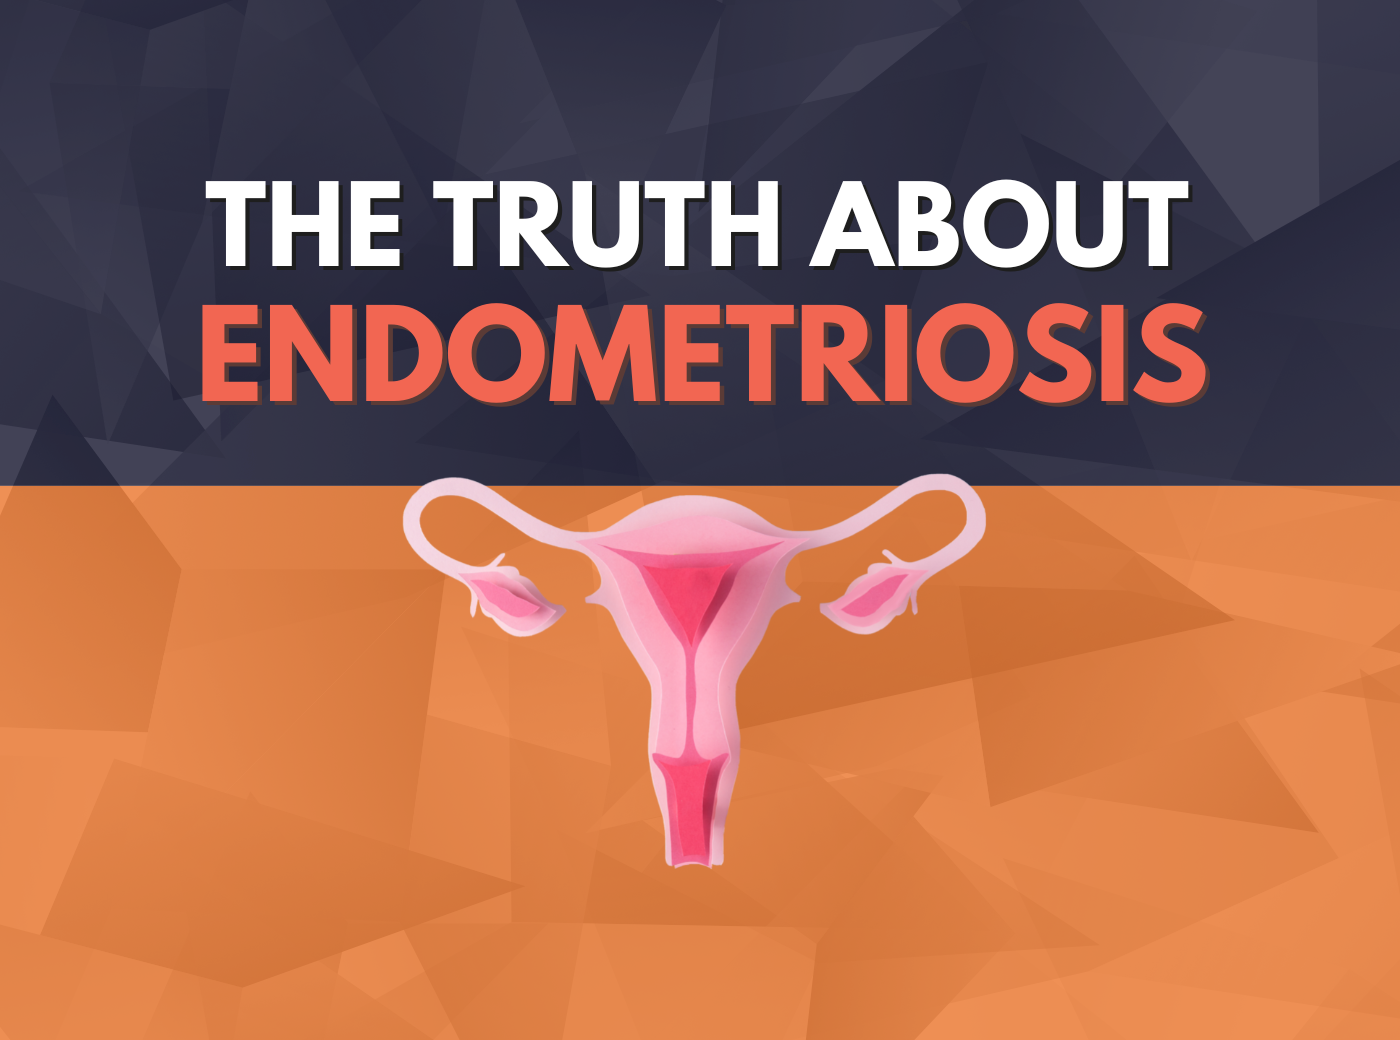 The truth about endometriosis